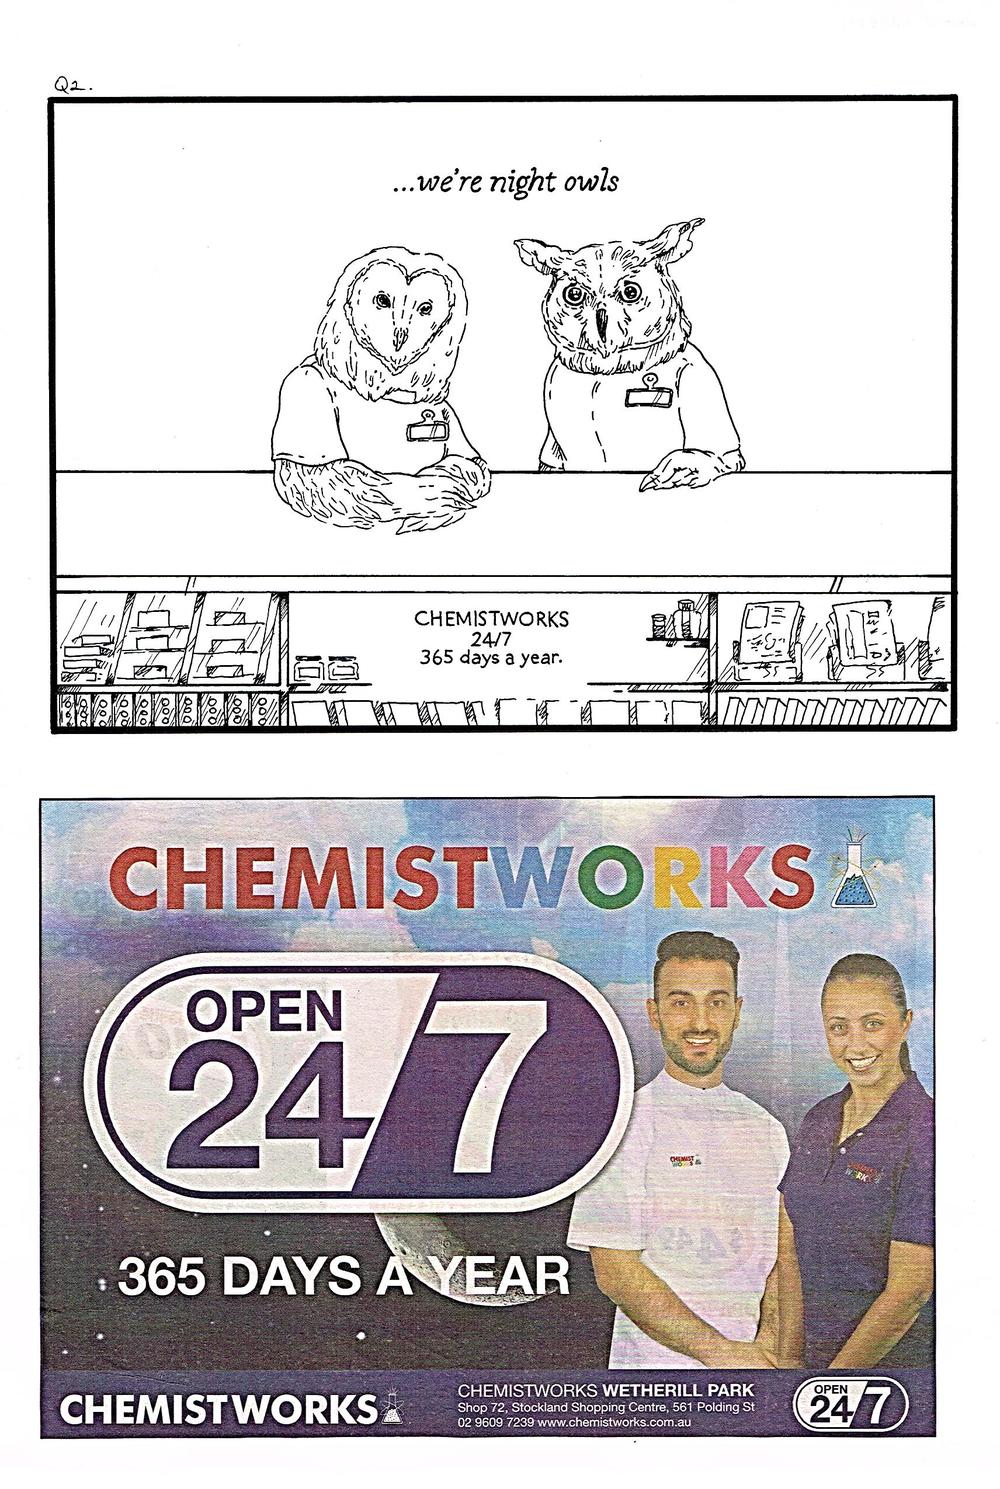  The brief asked us to change an ad we thought was particularly godawful...I chose the unfortunate people at Chemistworks to pick on... 